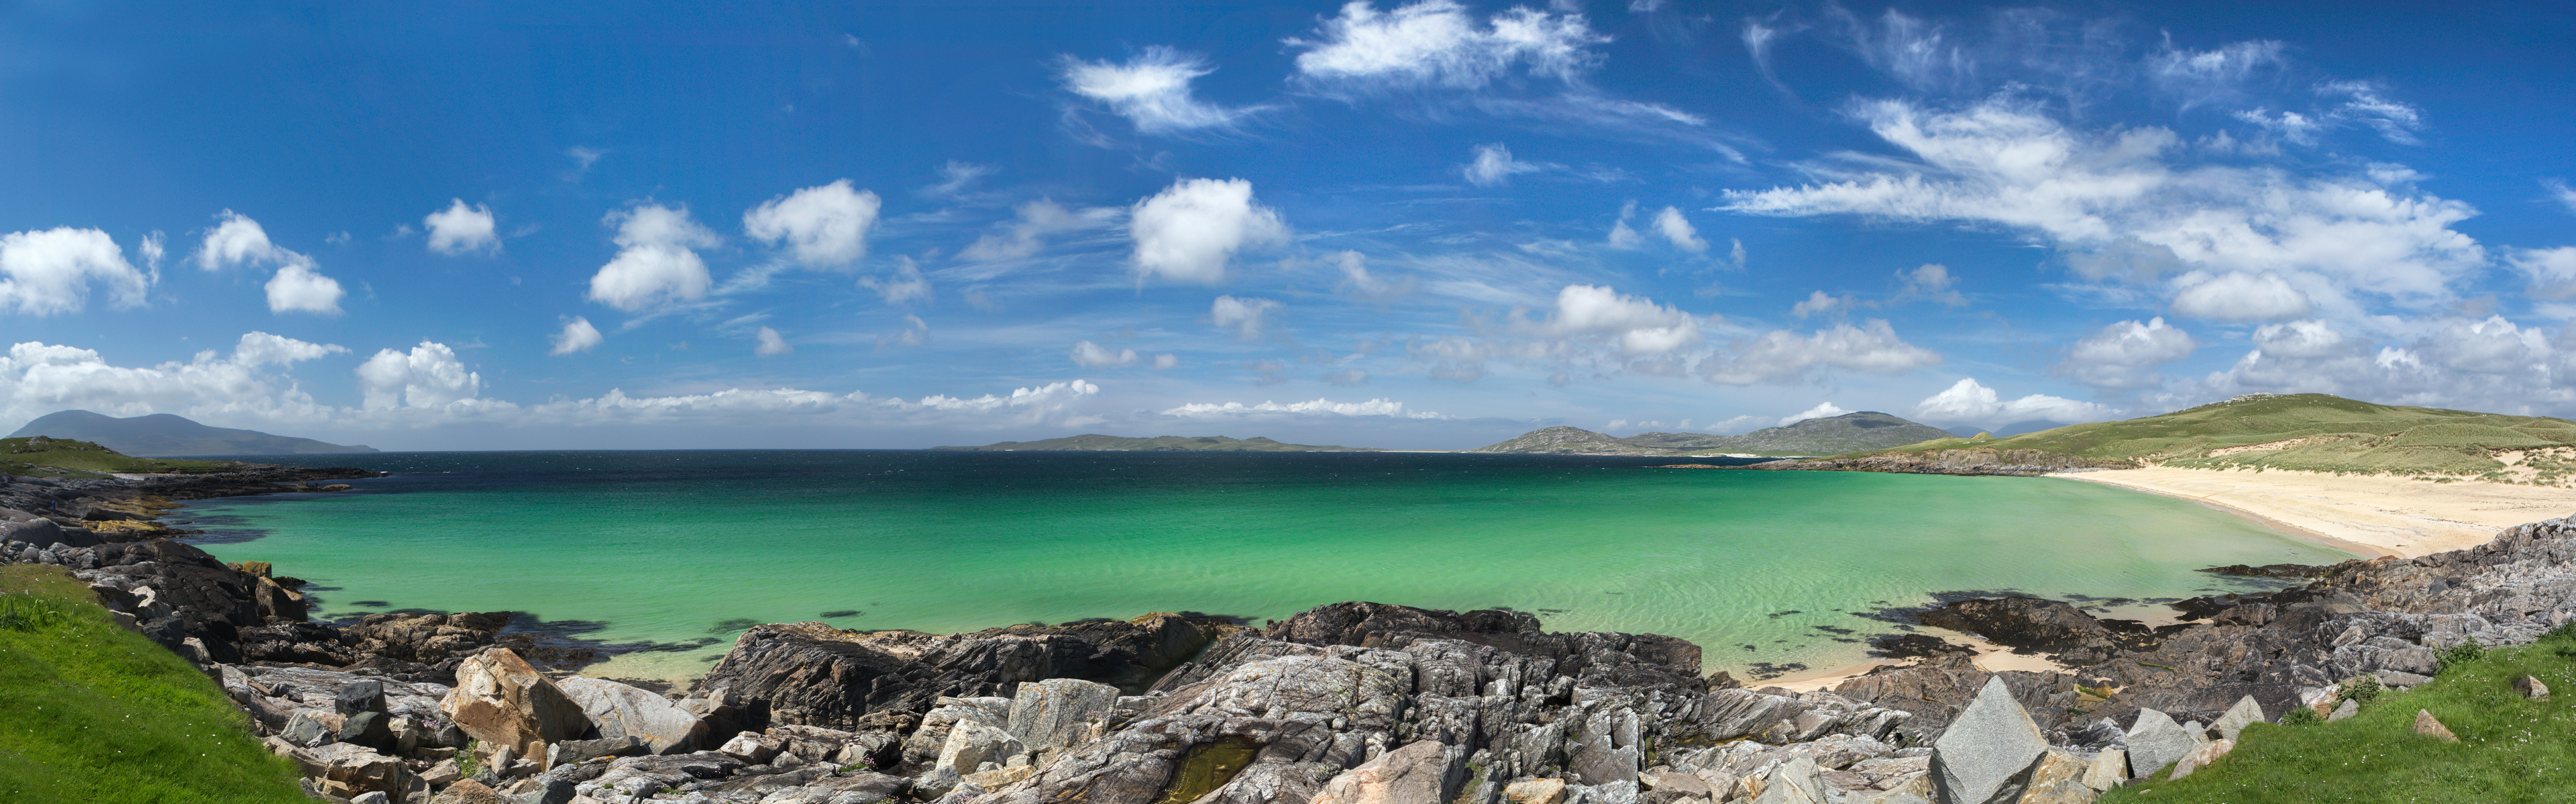 Turquoise waters of Luskentyre beach on the Isle of Harris, Outer Hebrides.